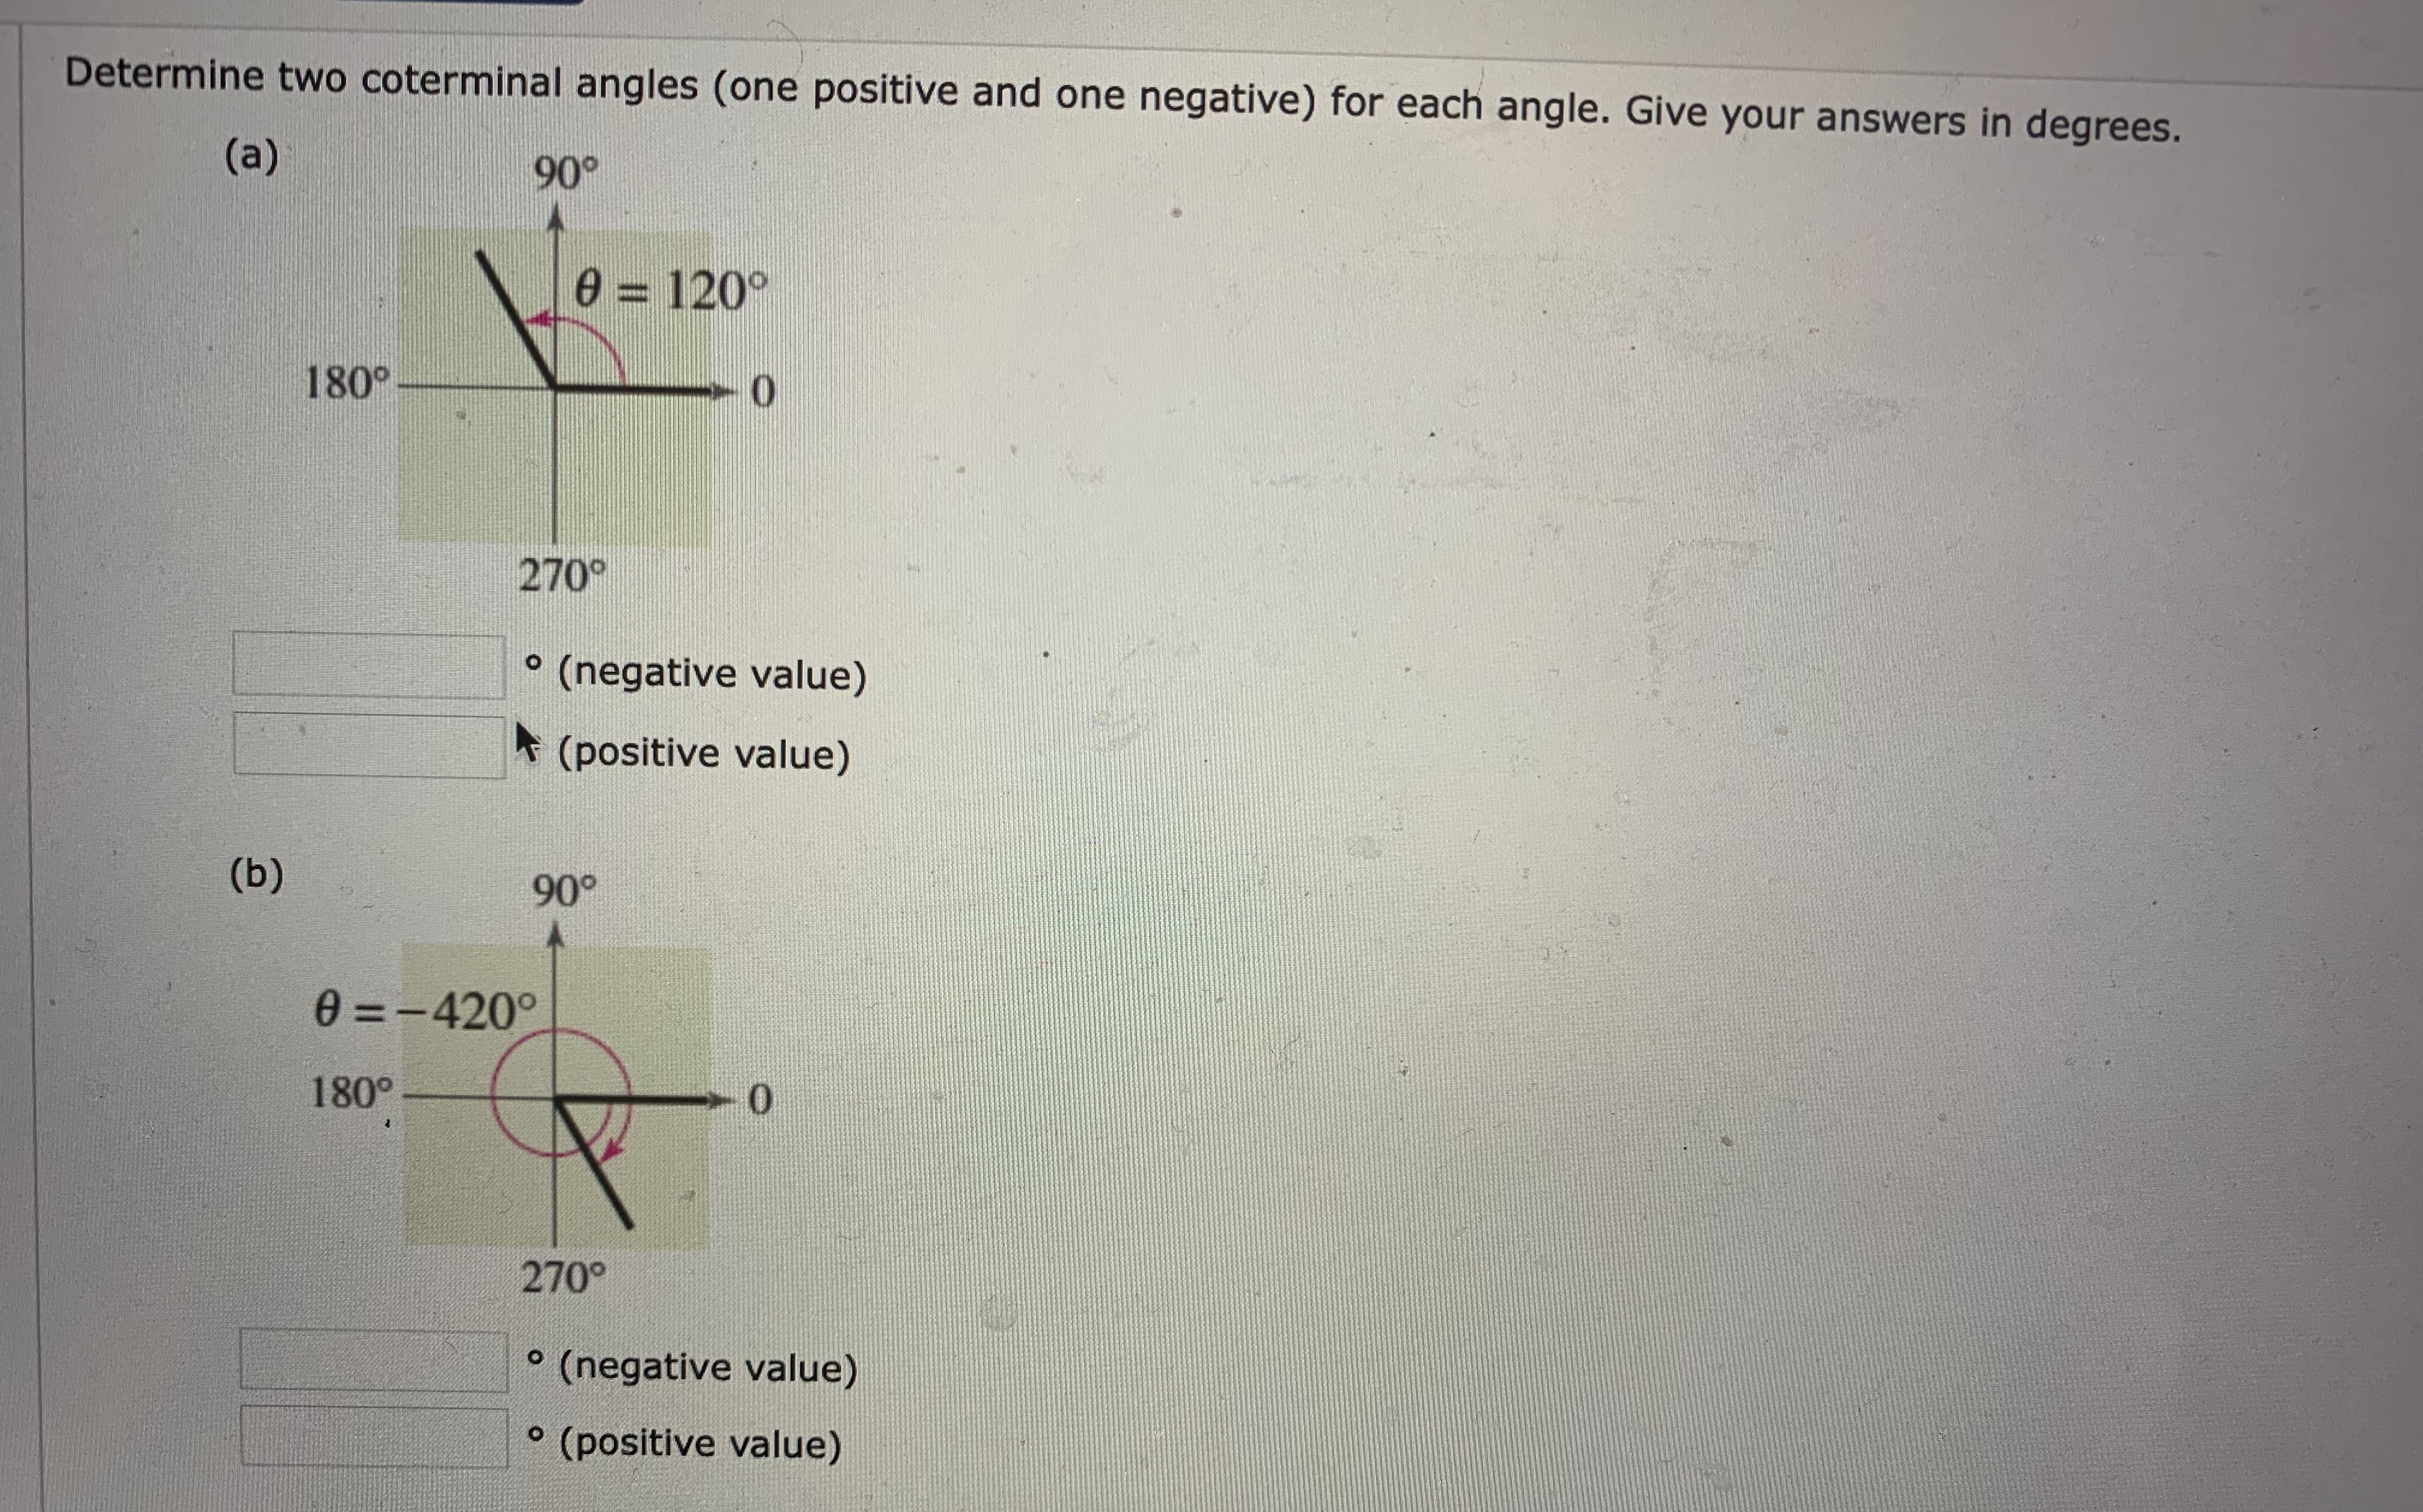 Determine two coterminal angles (one positive and one negative) for each angle. Give your answers in degrees.
